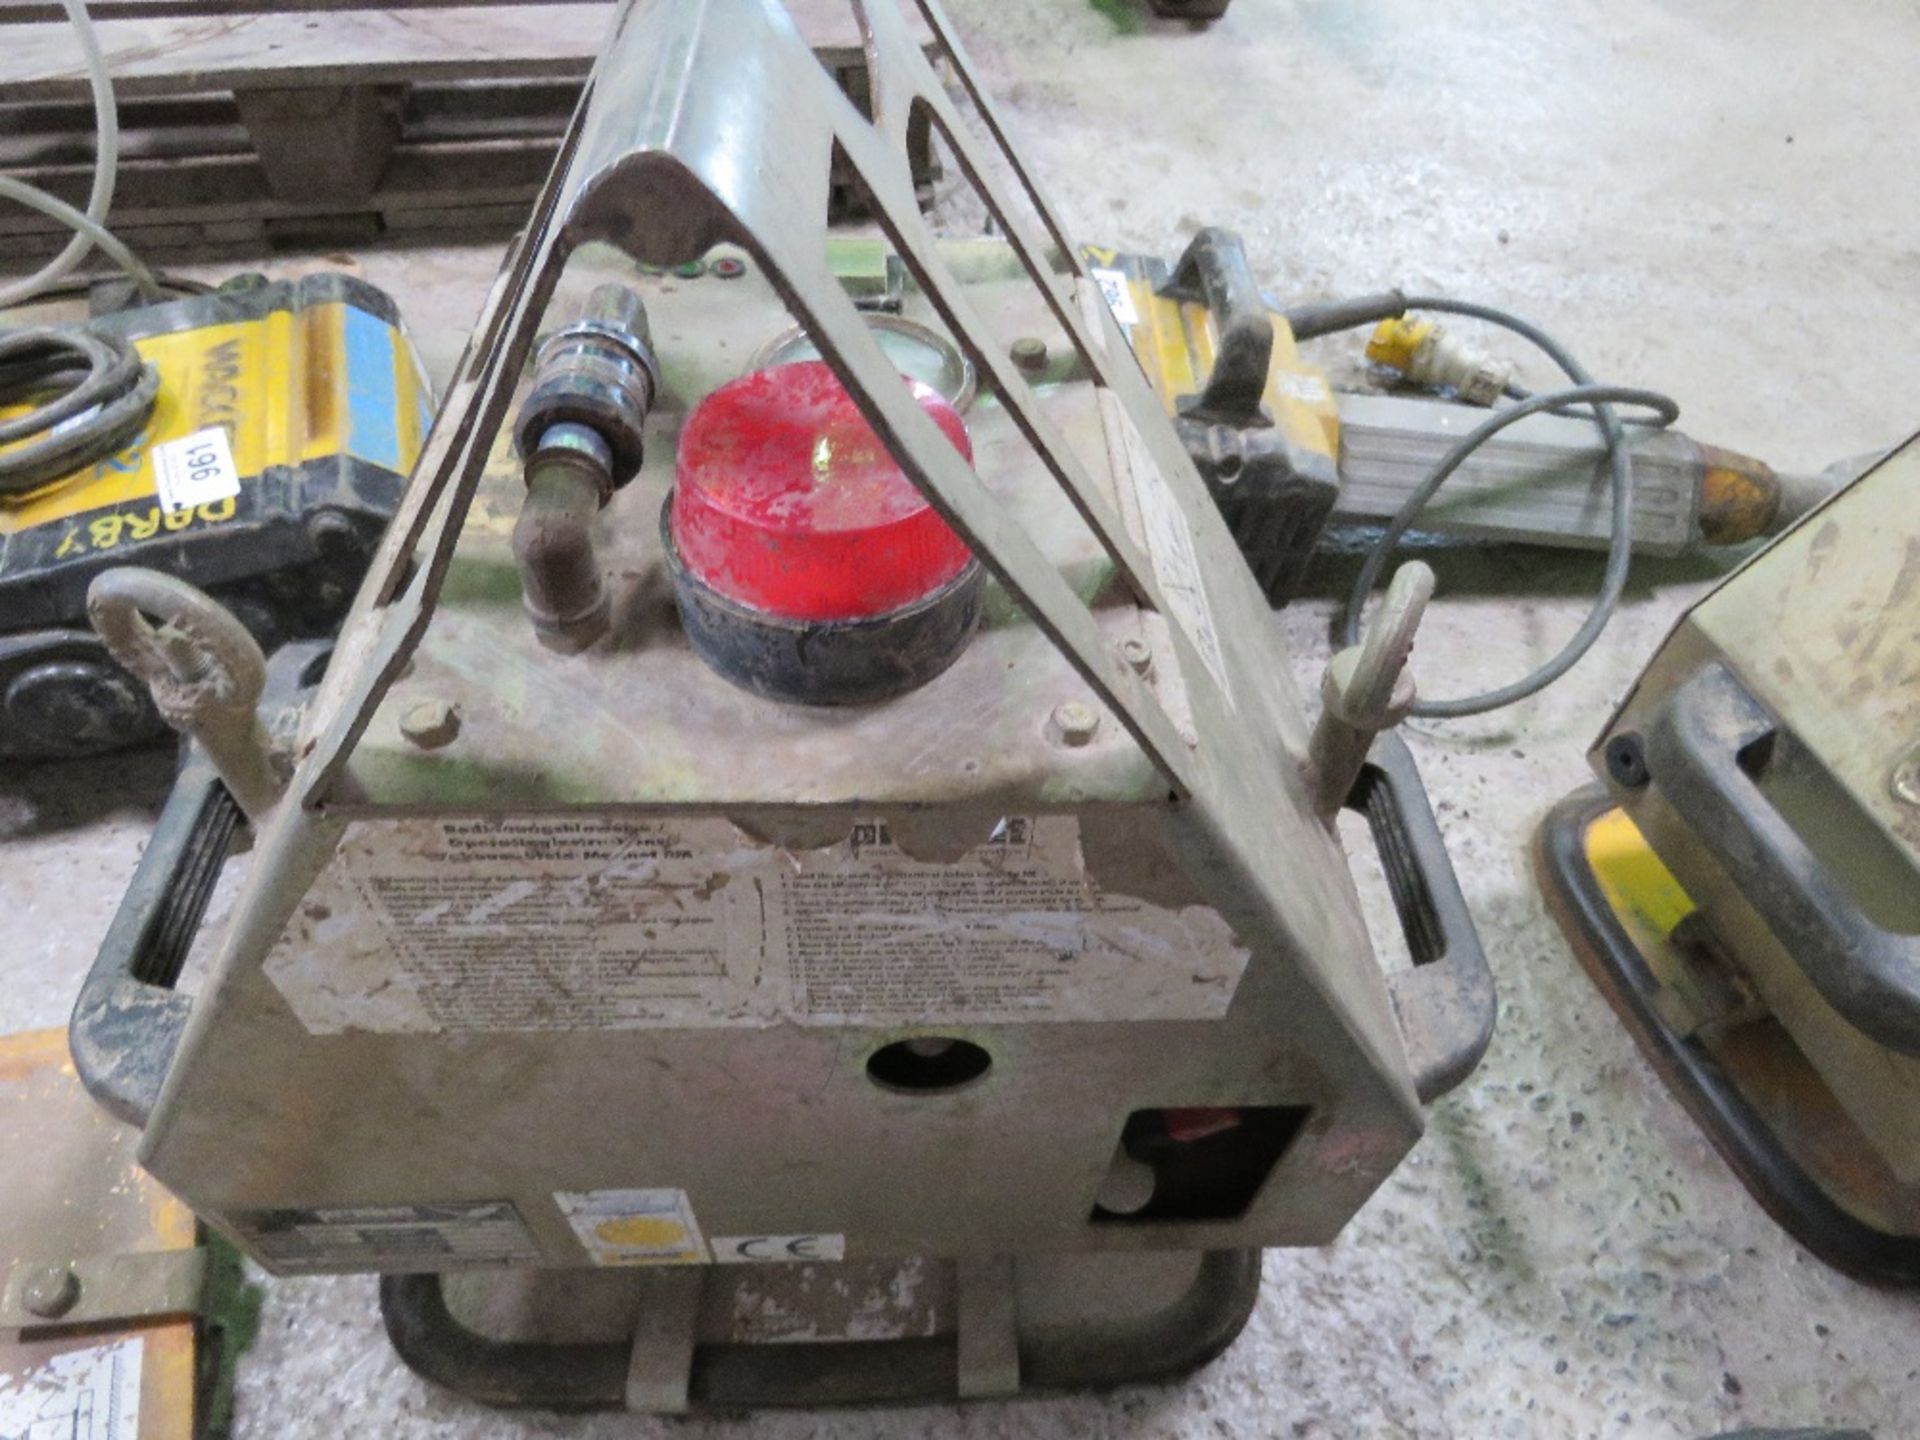 PROBST SUCTION KERB LIFTER FOR EXCAVATOR. DIRECT FROM A LOCAL GROUNDWORKS COMPANY AS PART OF THEI - Image 2 of 2